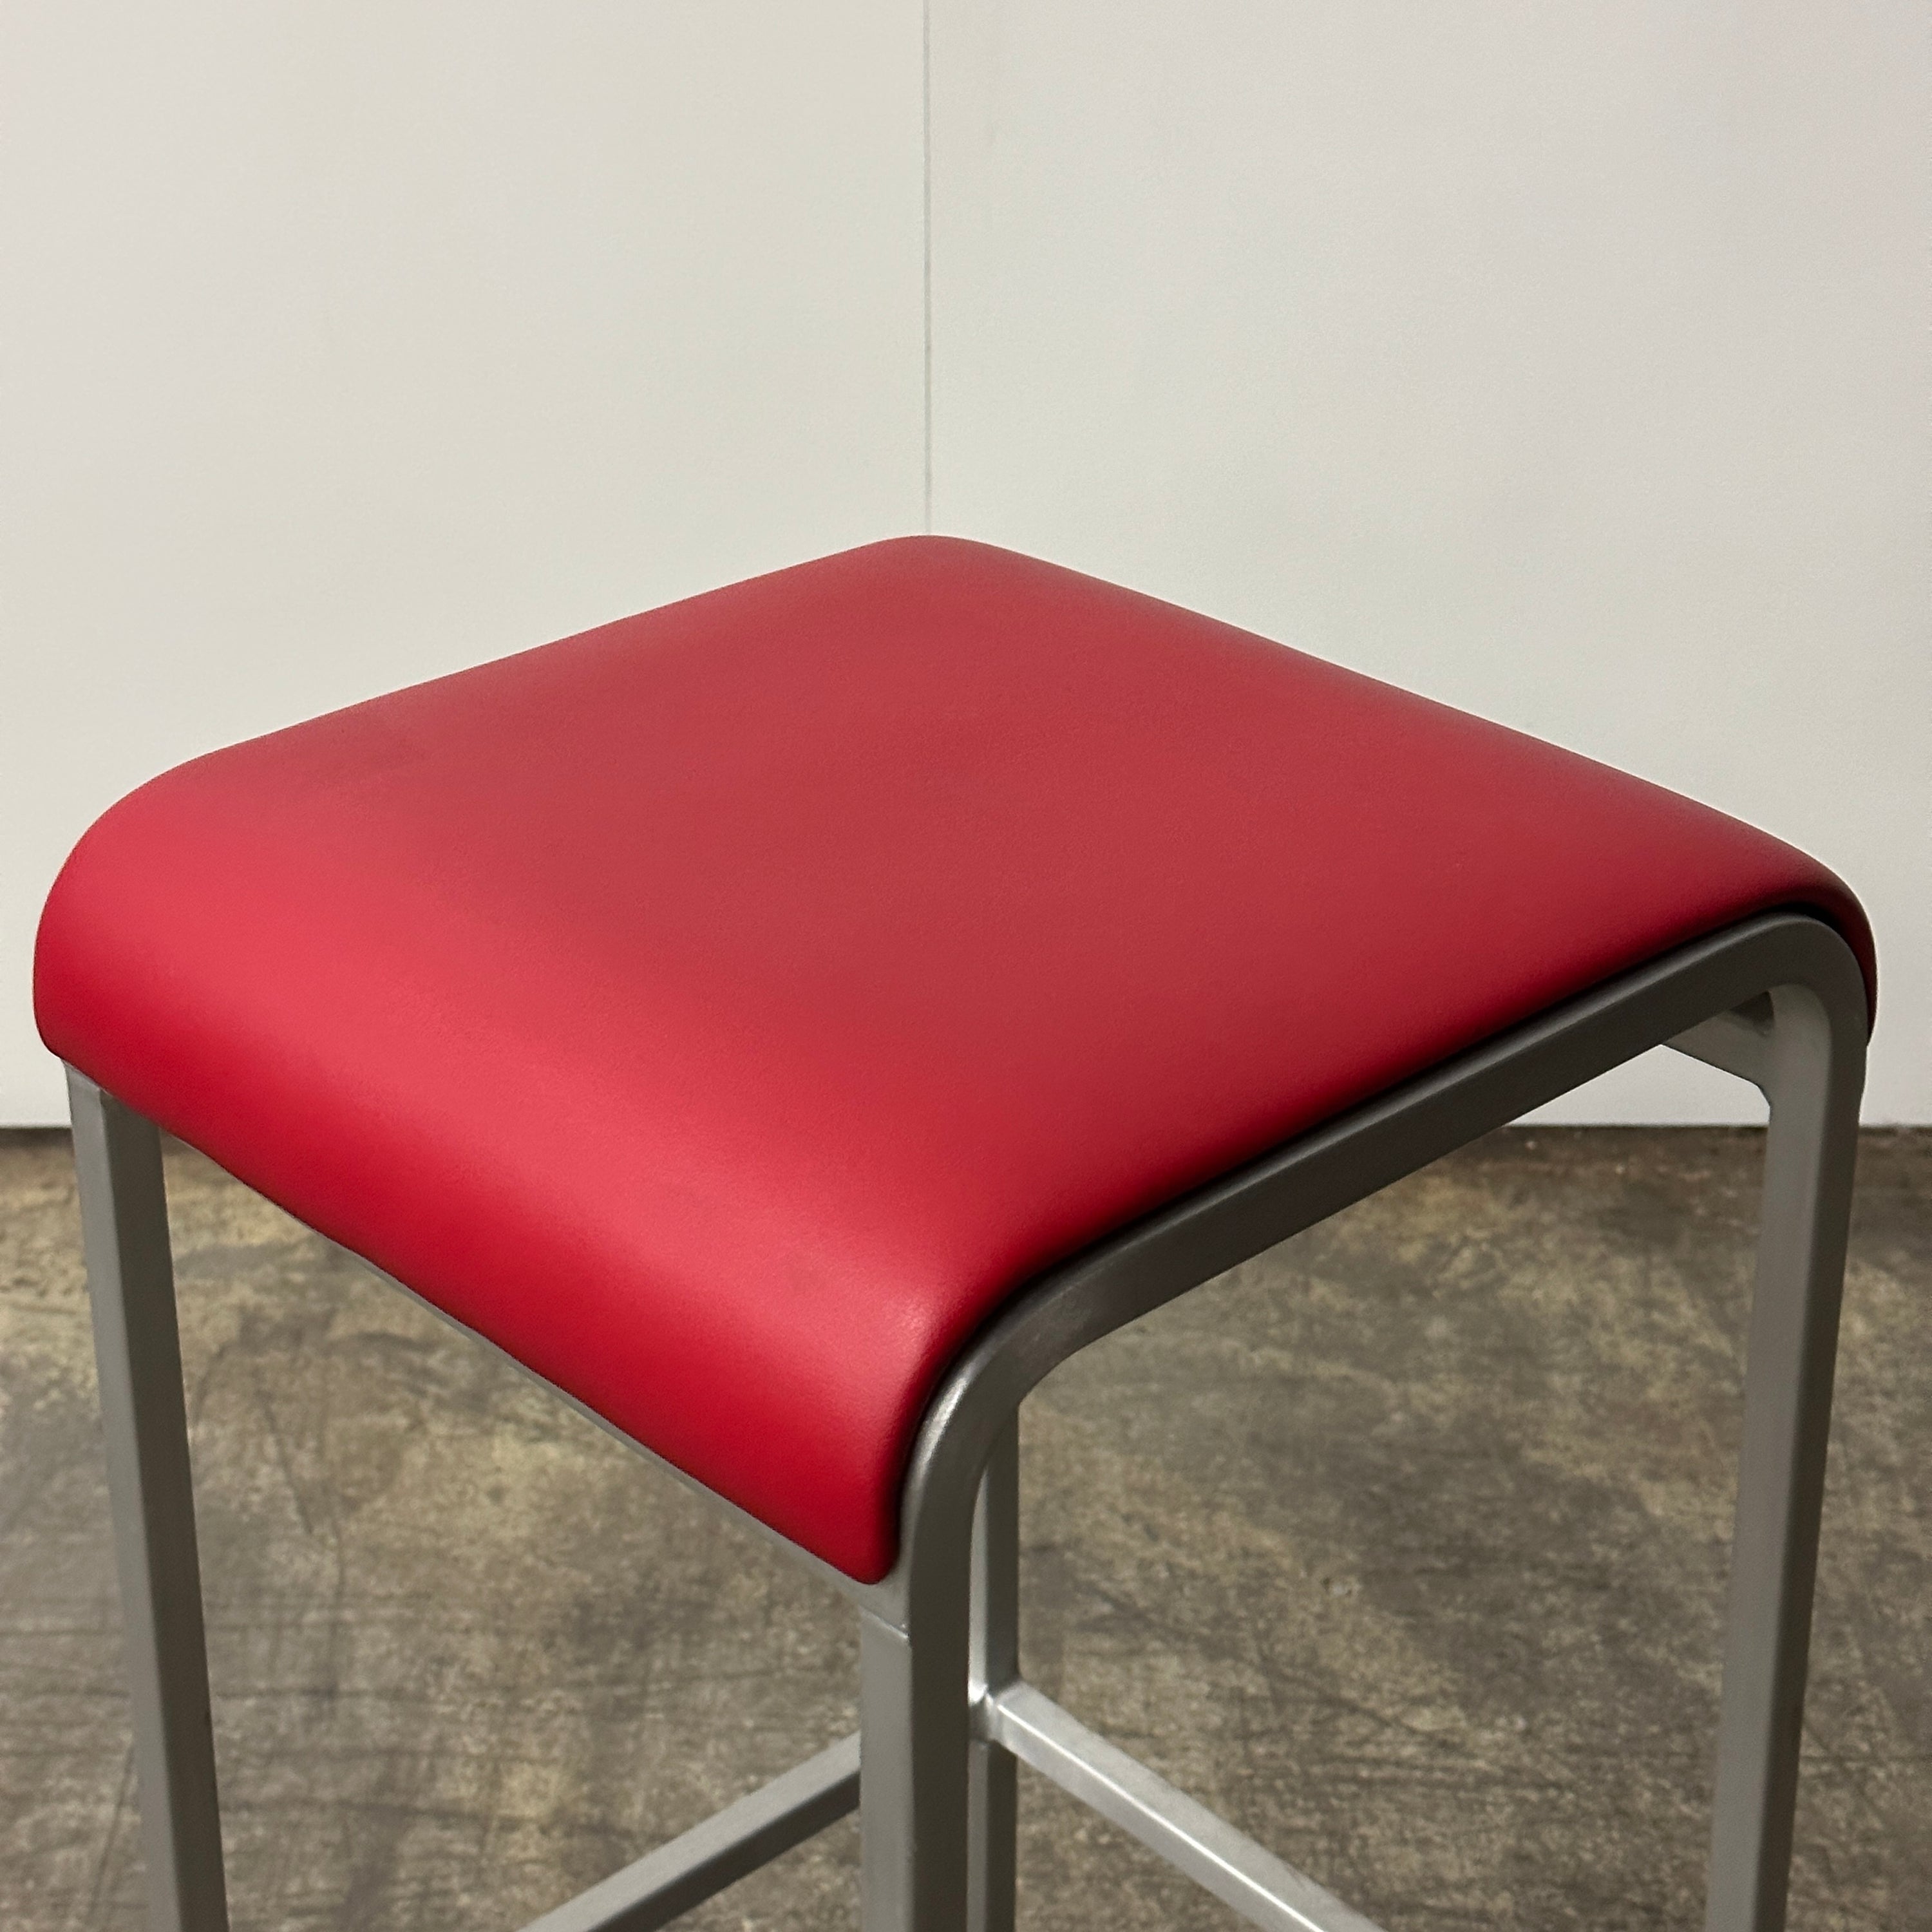 20-06 Stool by Norman Foster for Emeco